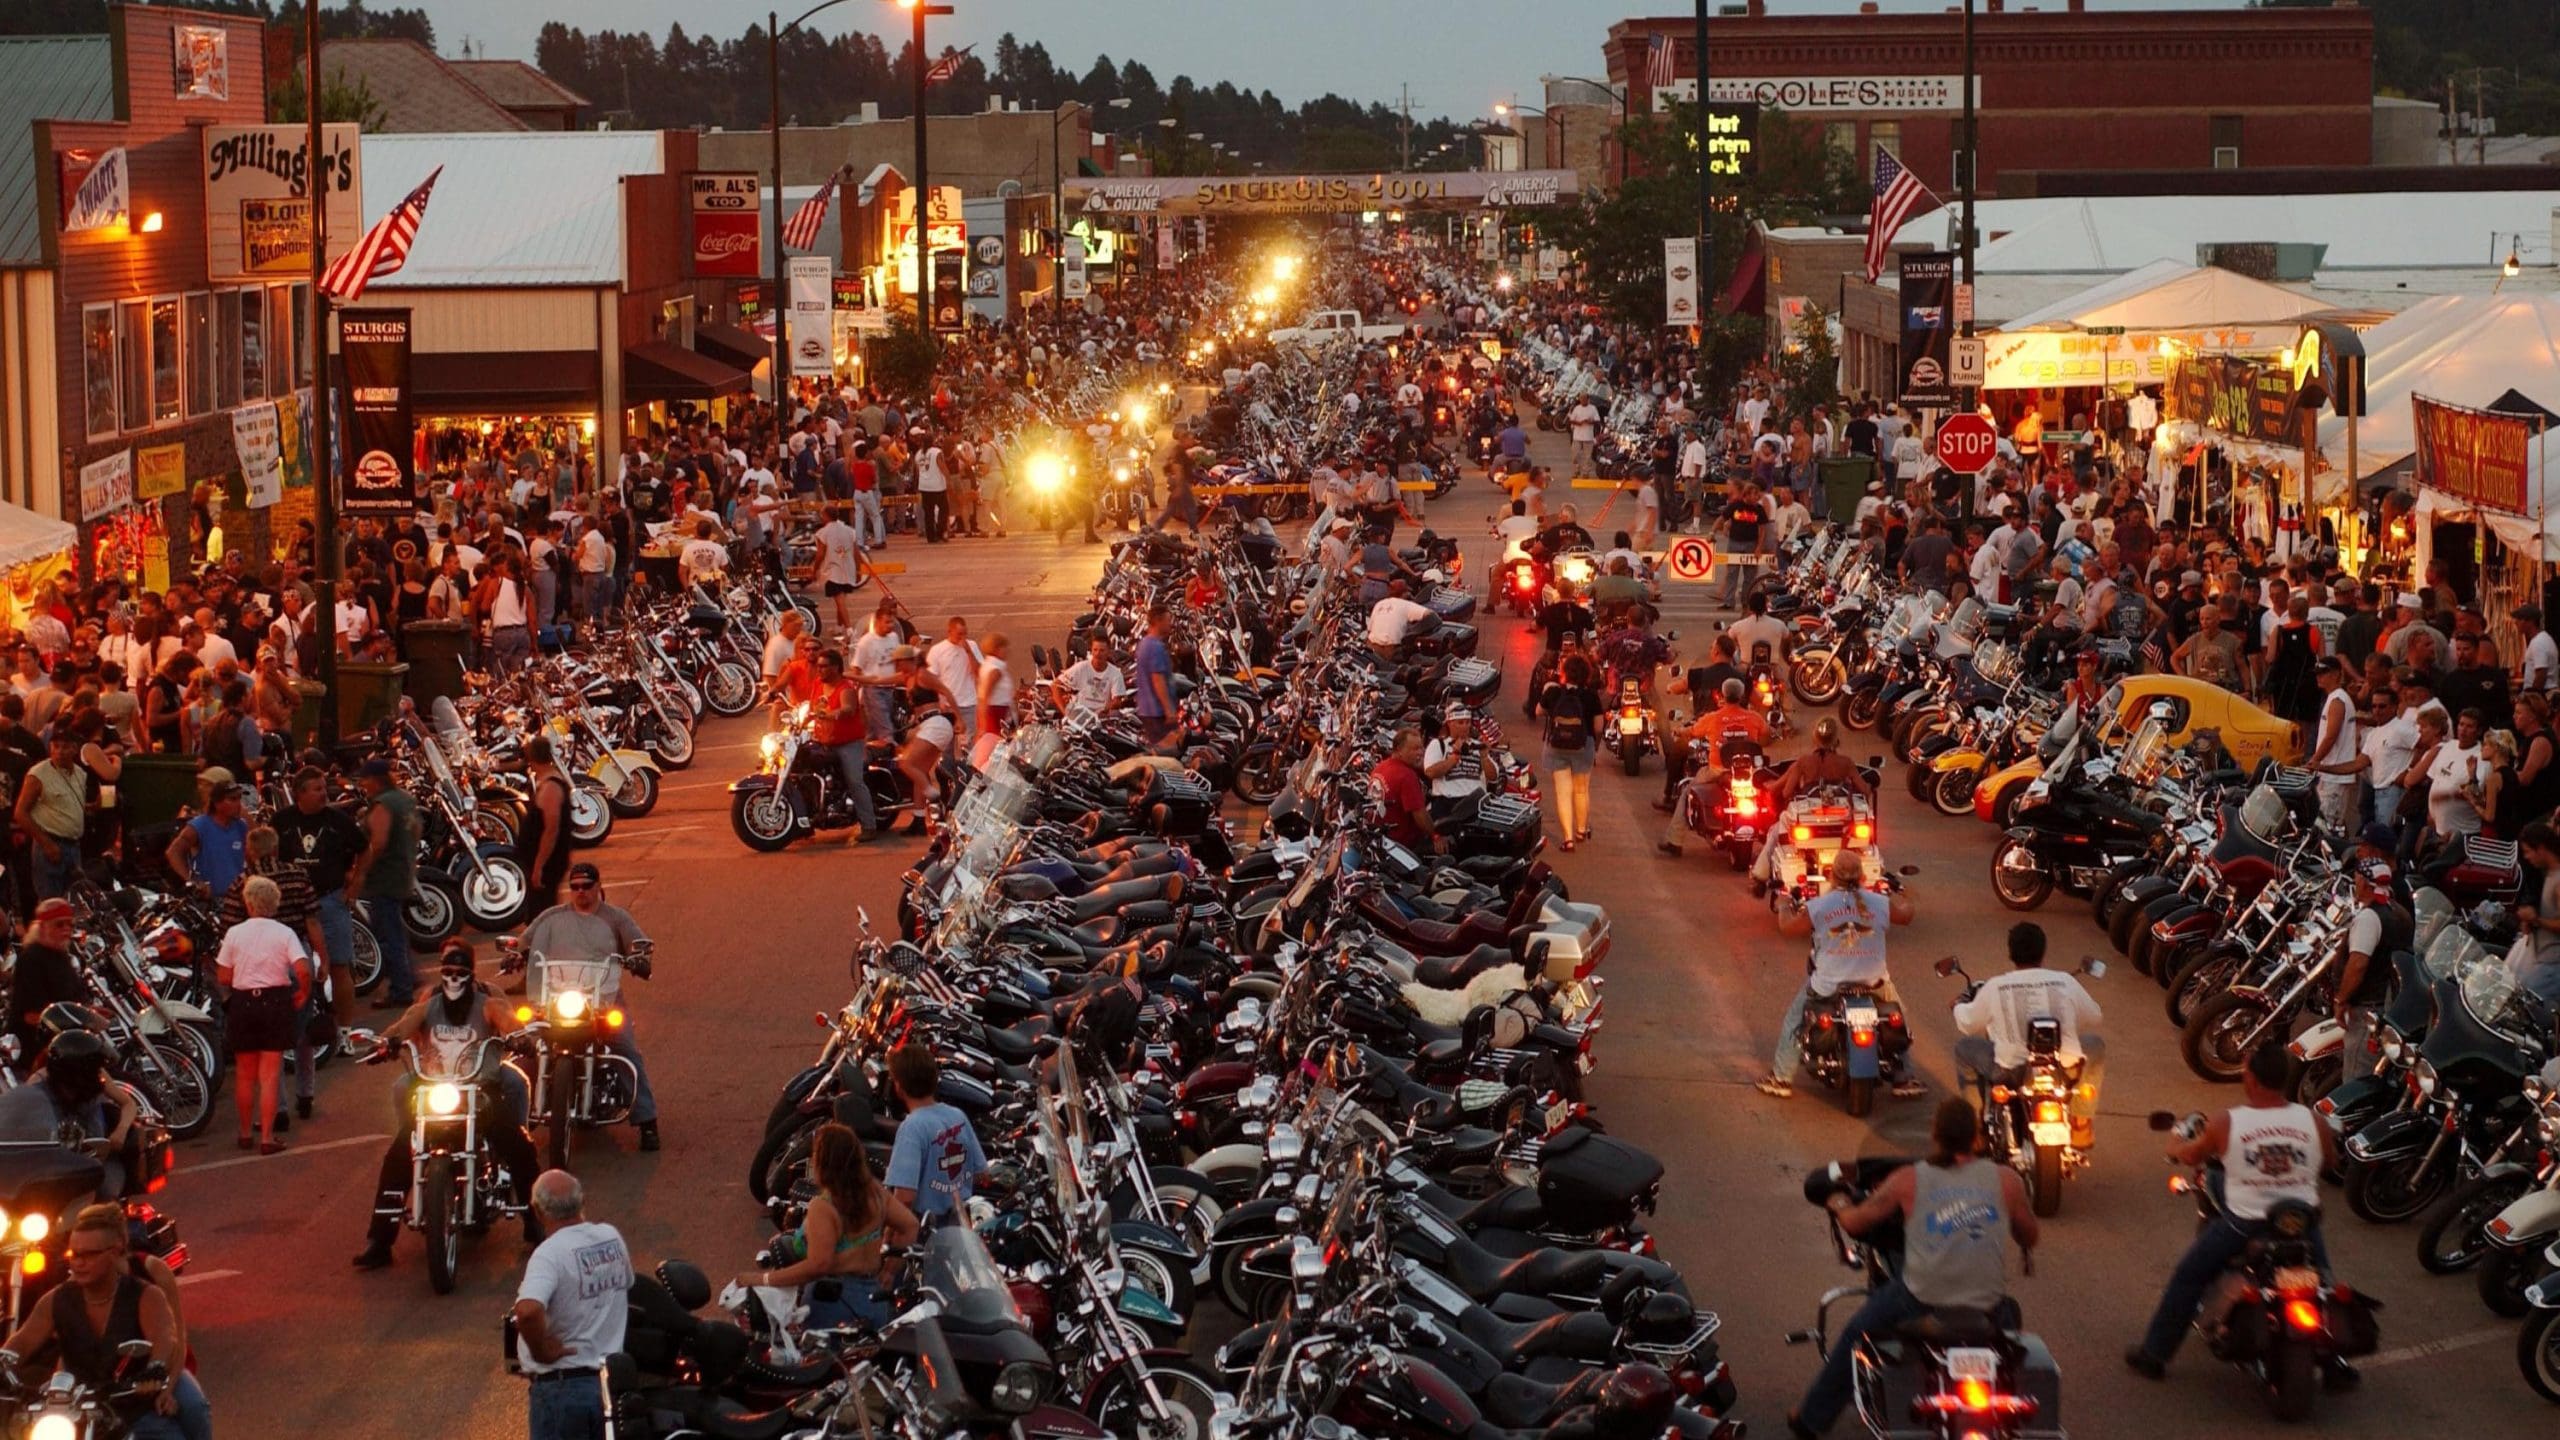 A view of a motorcycle rally that took place in 2021: Many motorcycles ride around as riders reacquaint each other post-COVID